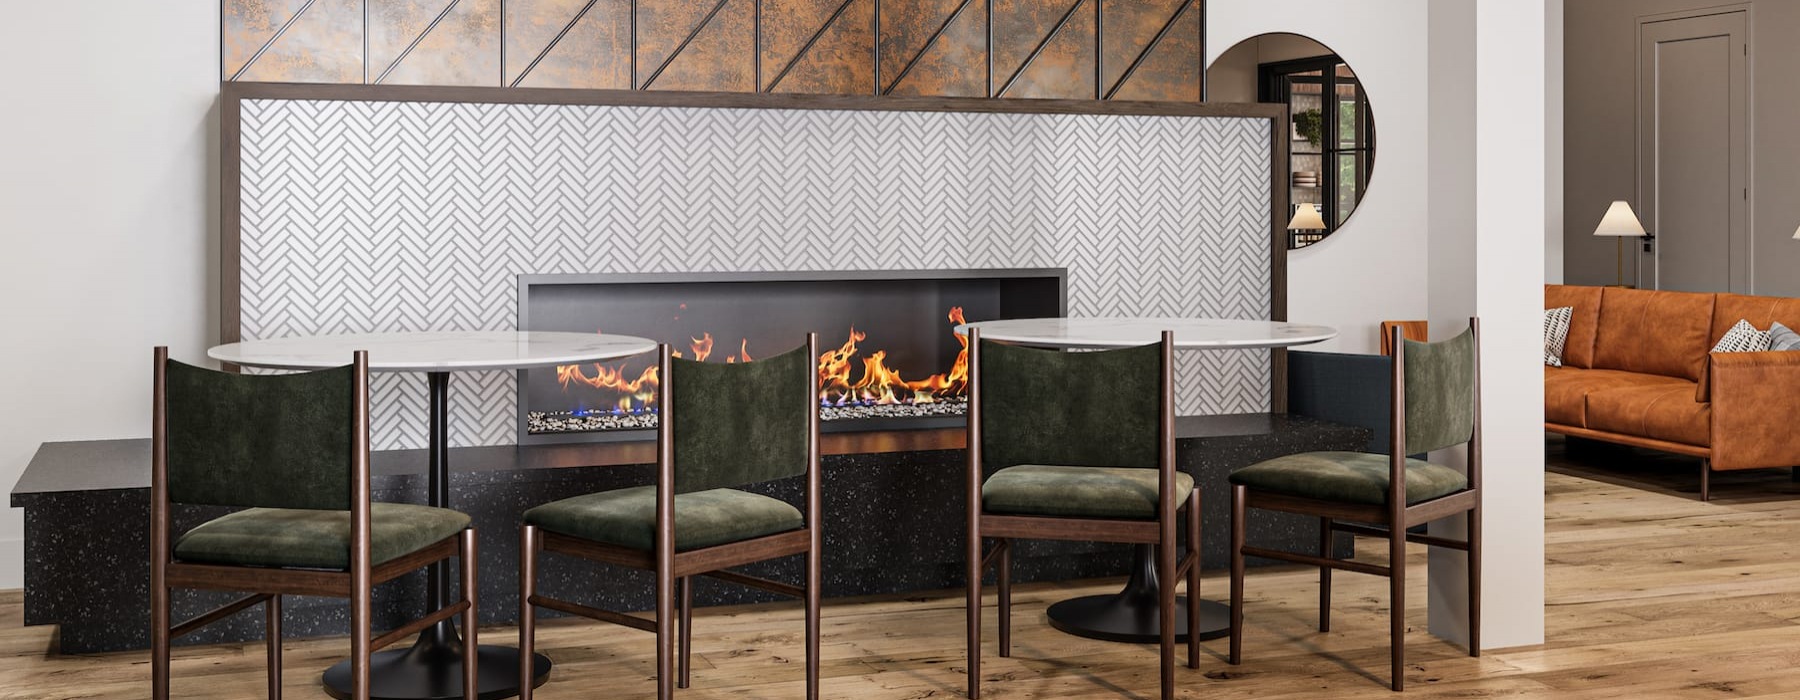 club room with a fireplace and chairs